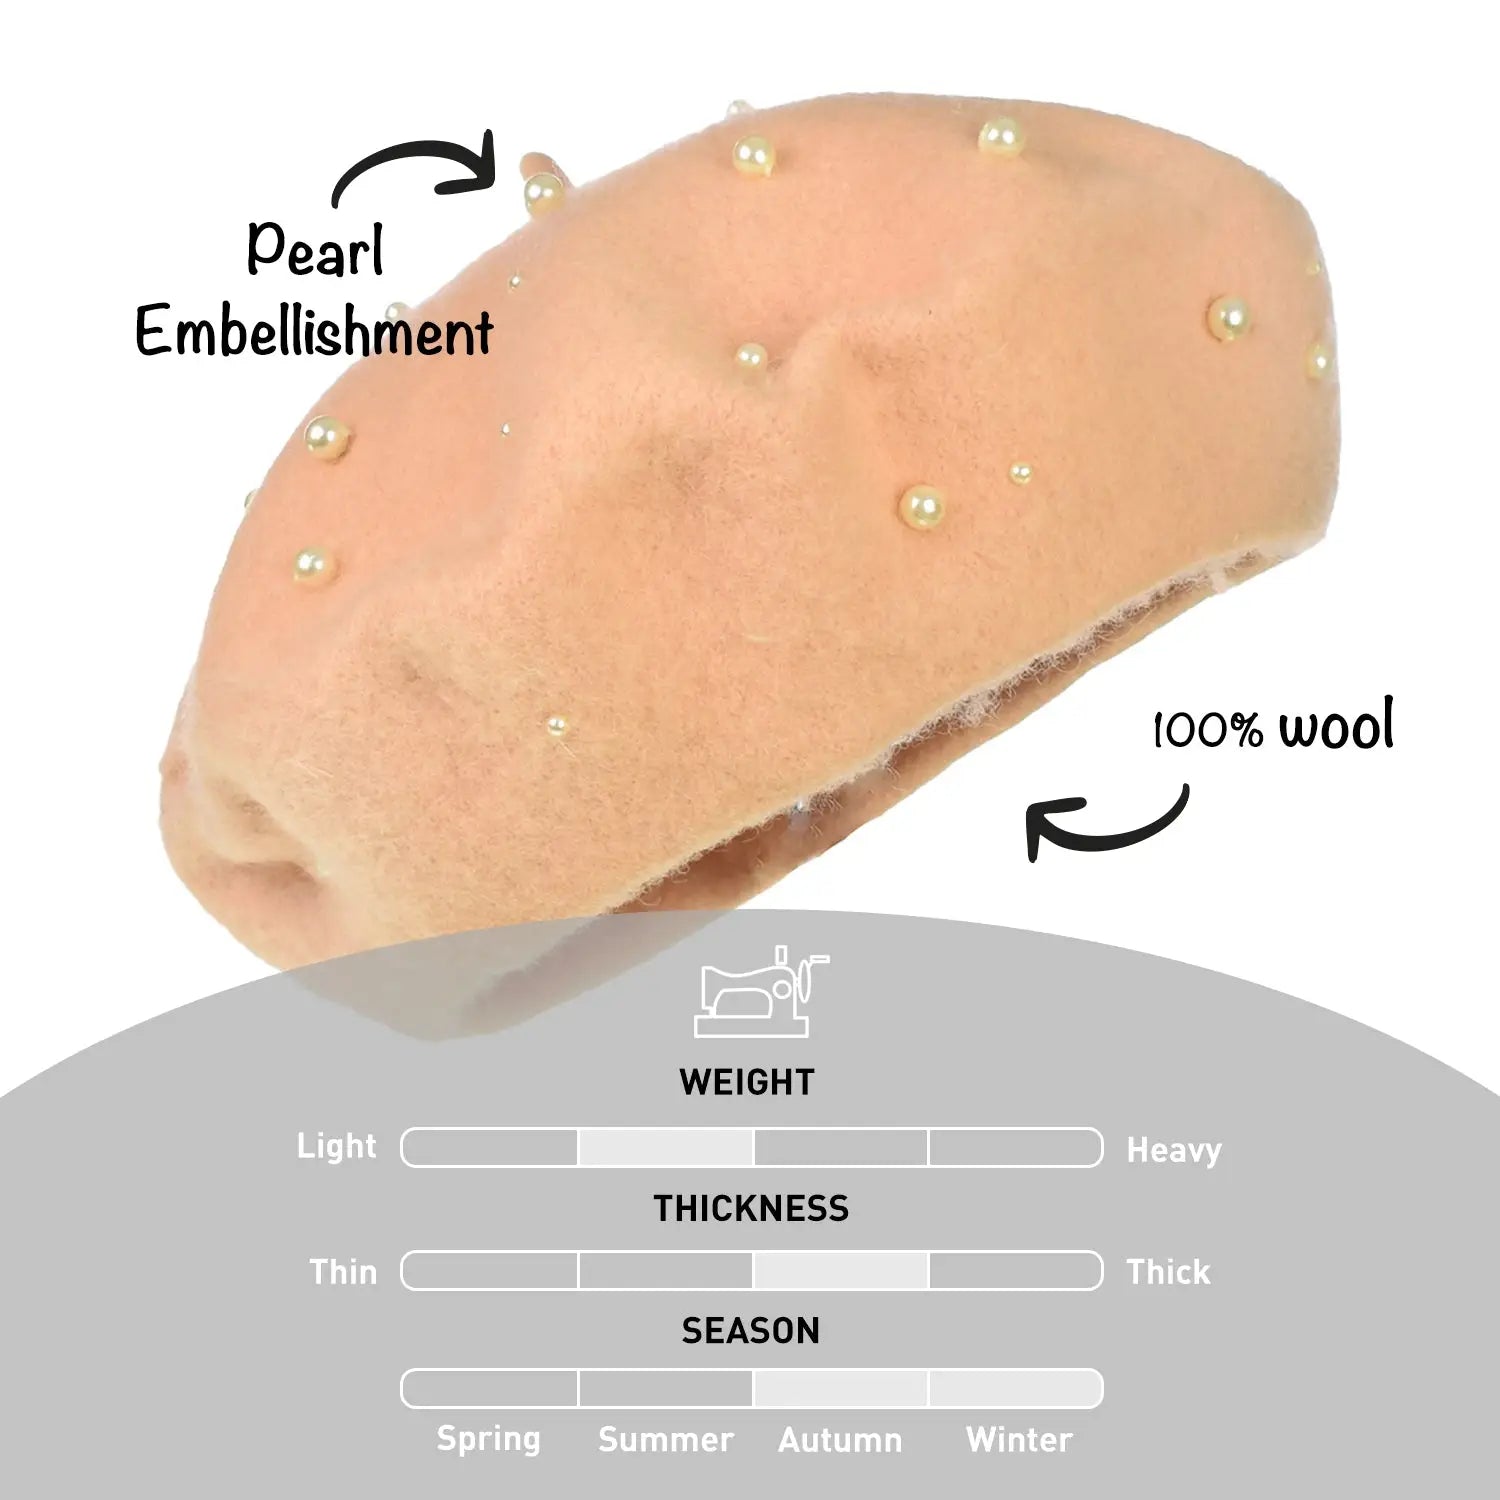 Diagram showing skin area on Parisian Classic Beret with Pearl Embellishment